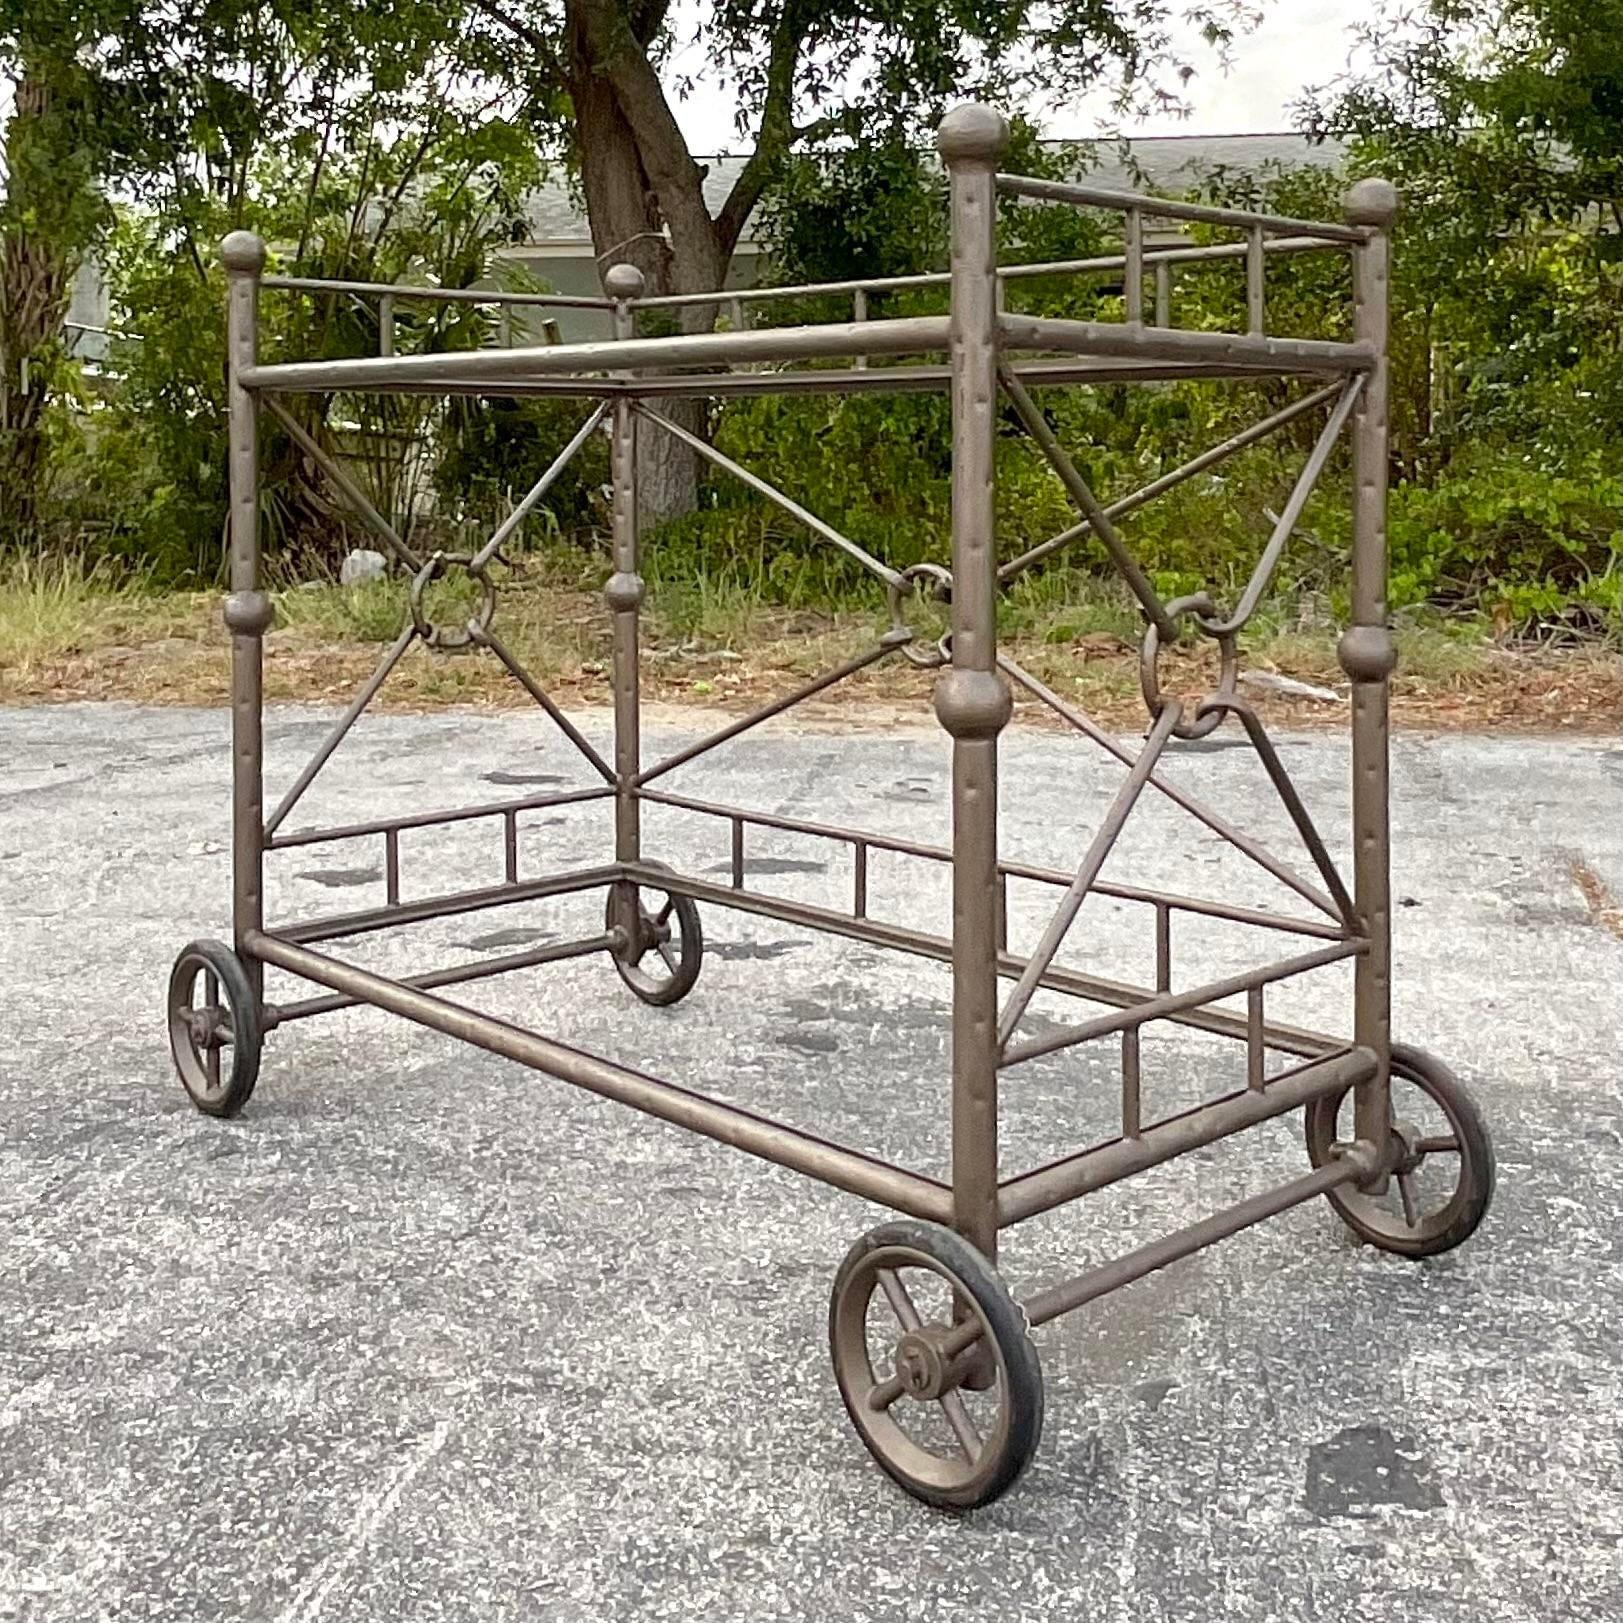 A fabulous vintage Coastal bar cart. A chic target back design in a cast aluminum. Great for places close to the ocean. Inset glass shelves and caster wheels for easy movement. Acquired from a Palm Beach estate.